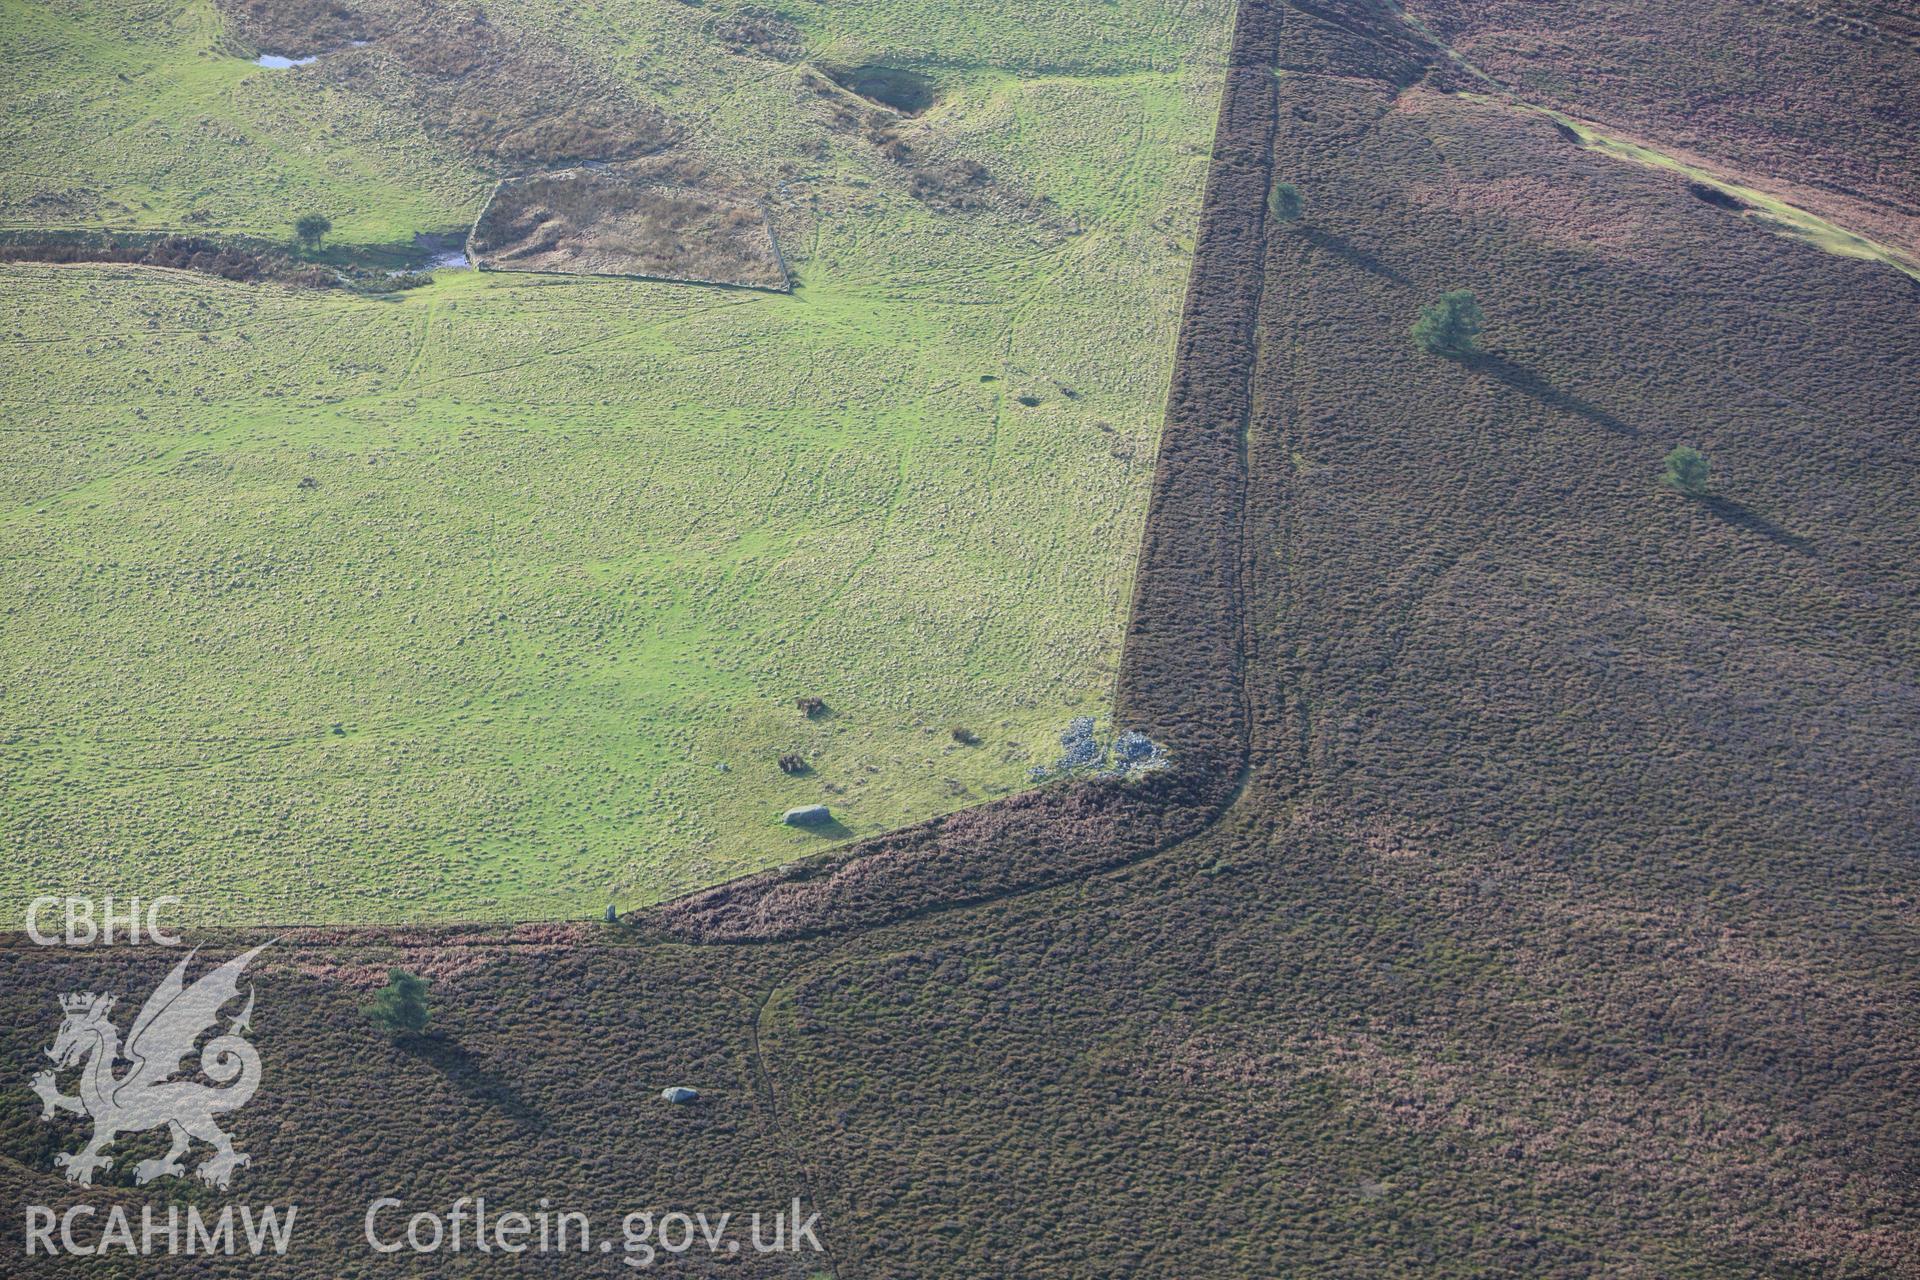 RCAHMW colour oblique aerial photograph of Eglwyseg Cairn Circle. Taken on 10 December 2009 by Toby Driver